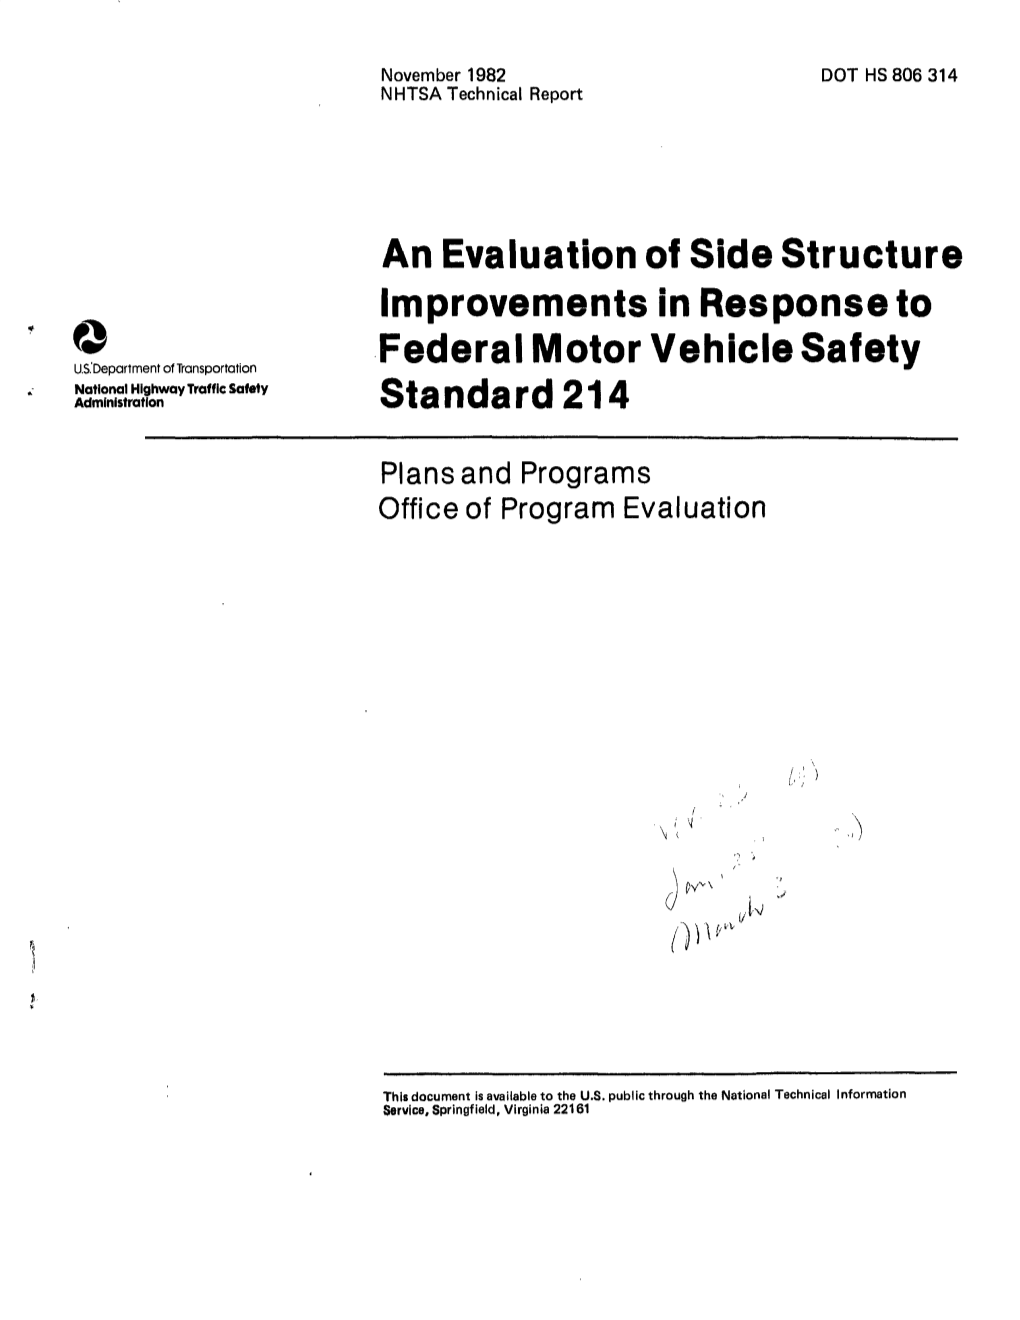 An Evaluation of Side Structure Improvements in Response to Federal Motor Vehicle Safety